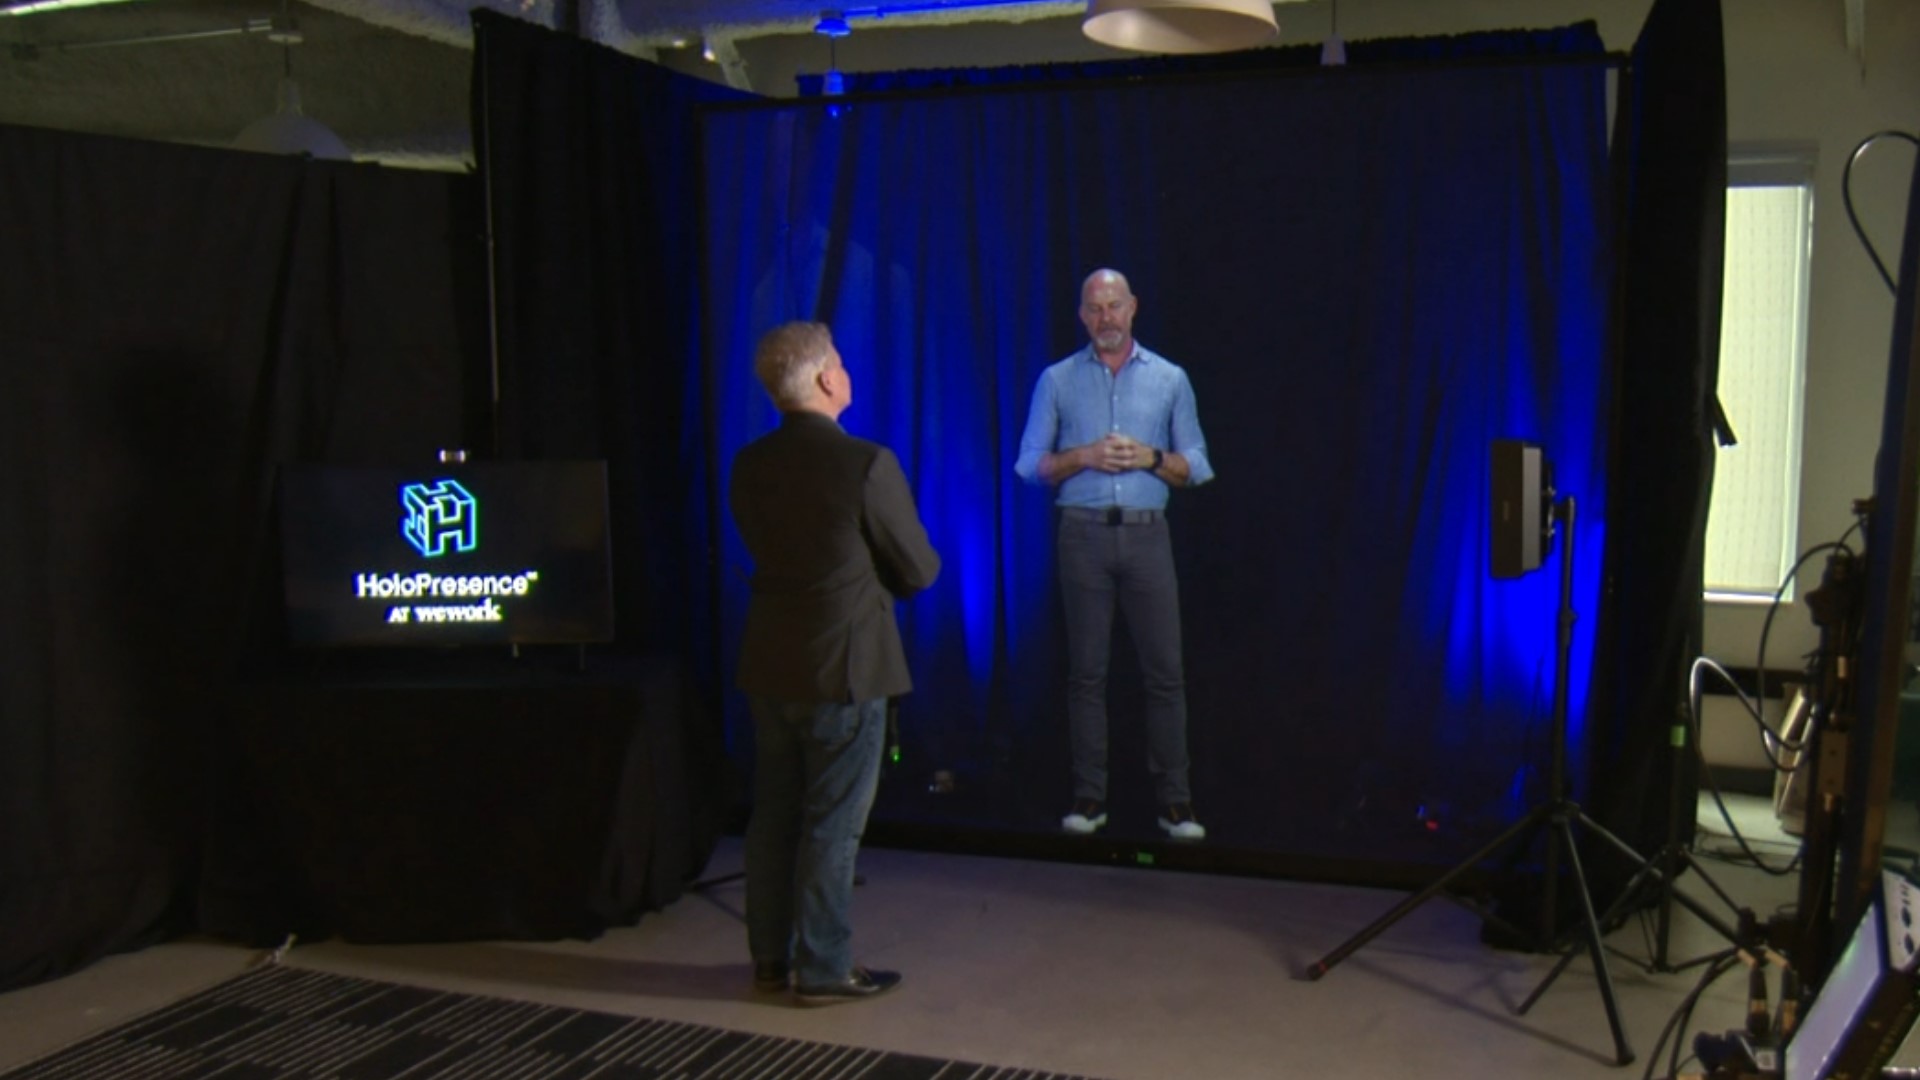 Hologram technology now available in Seattle can beam you into almost any location on Earth. #king5evening